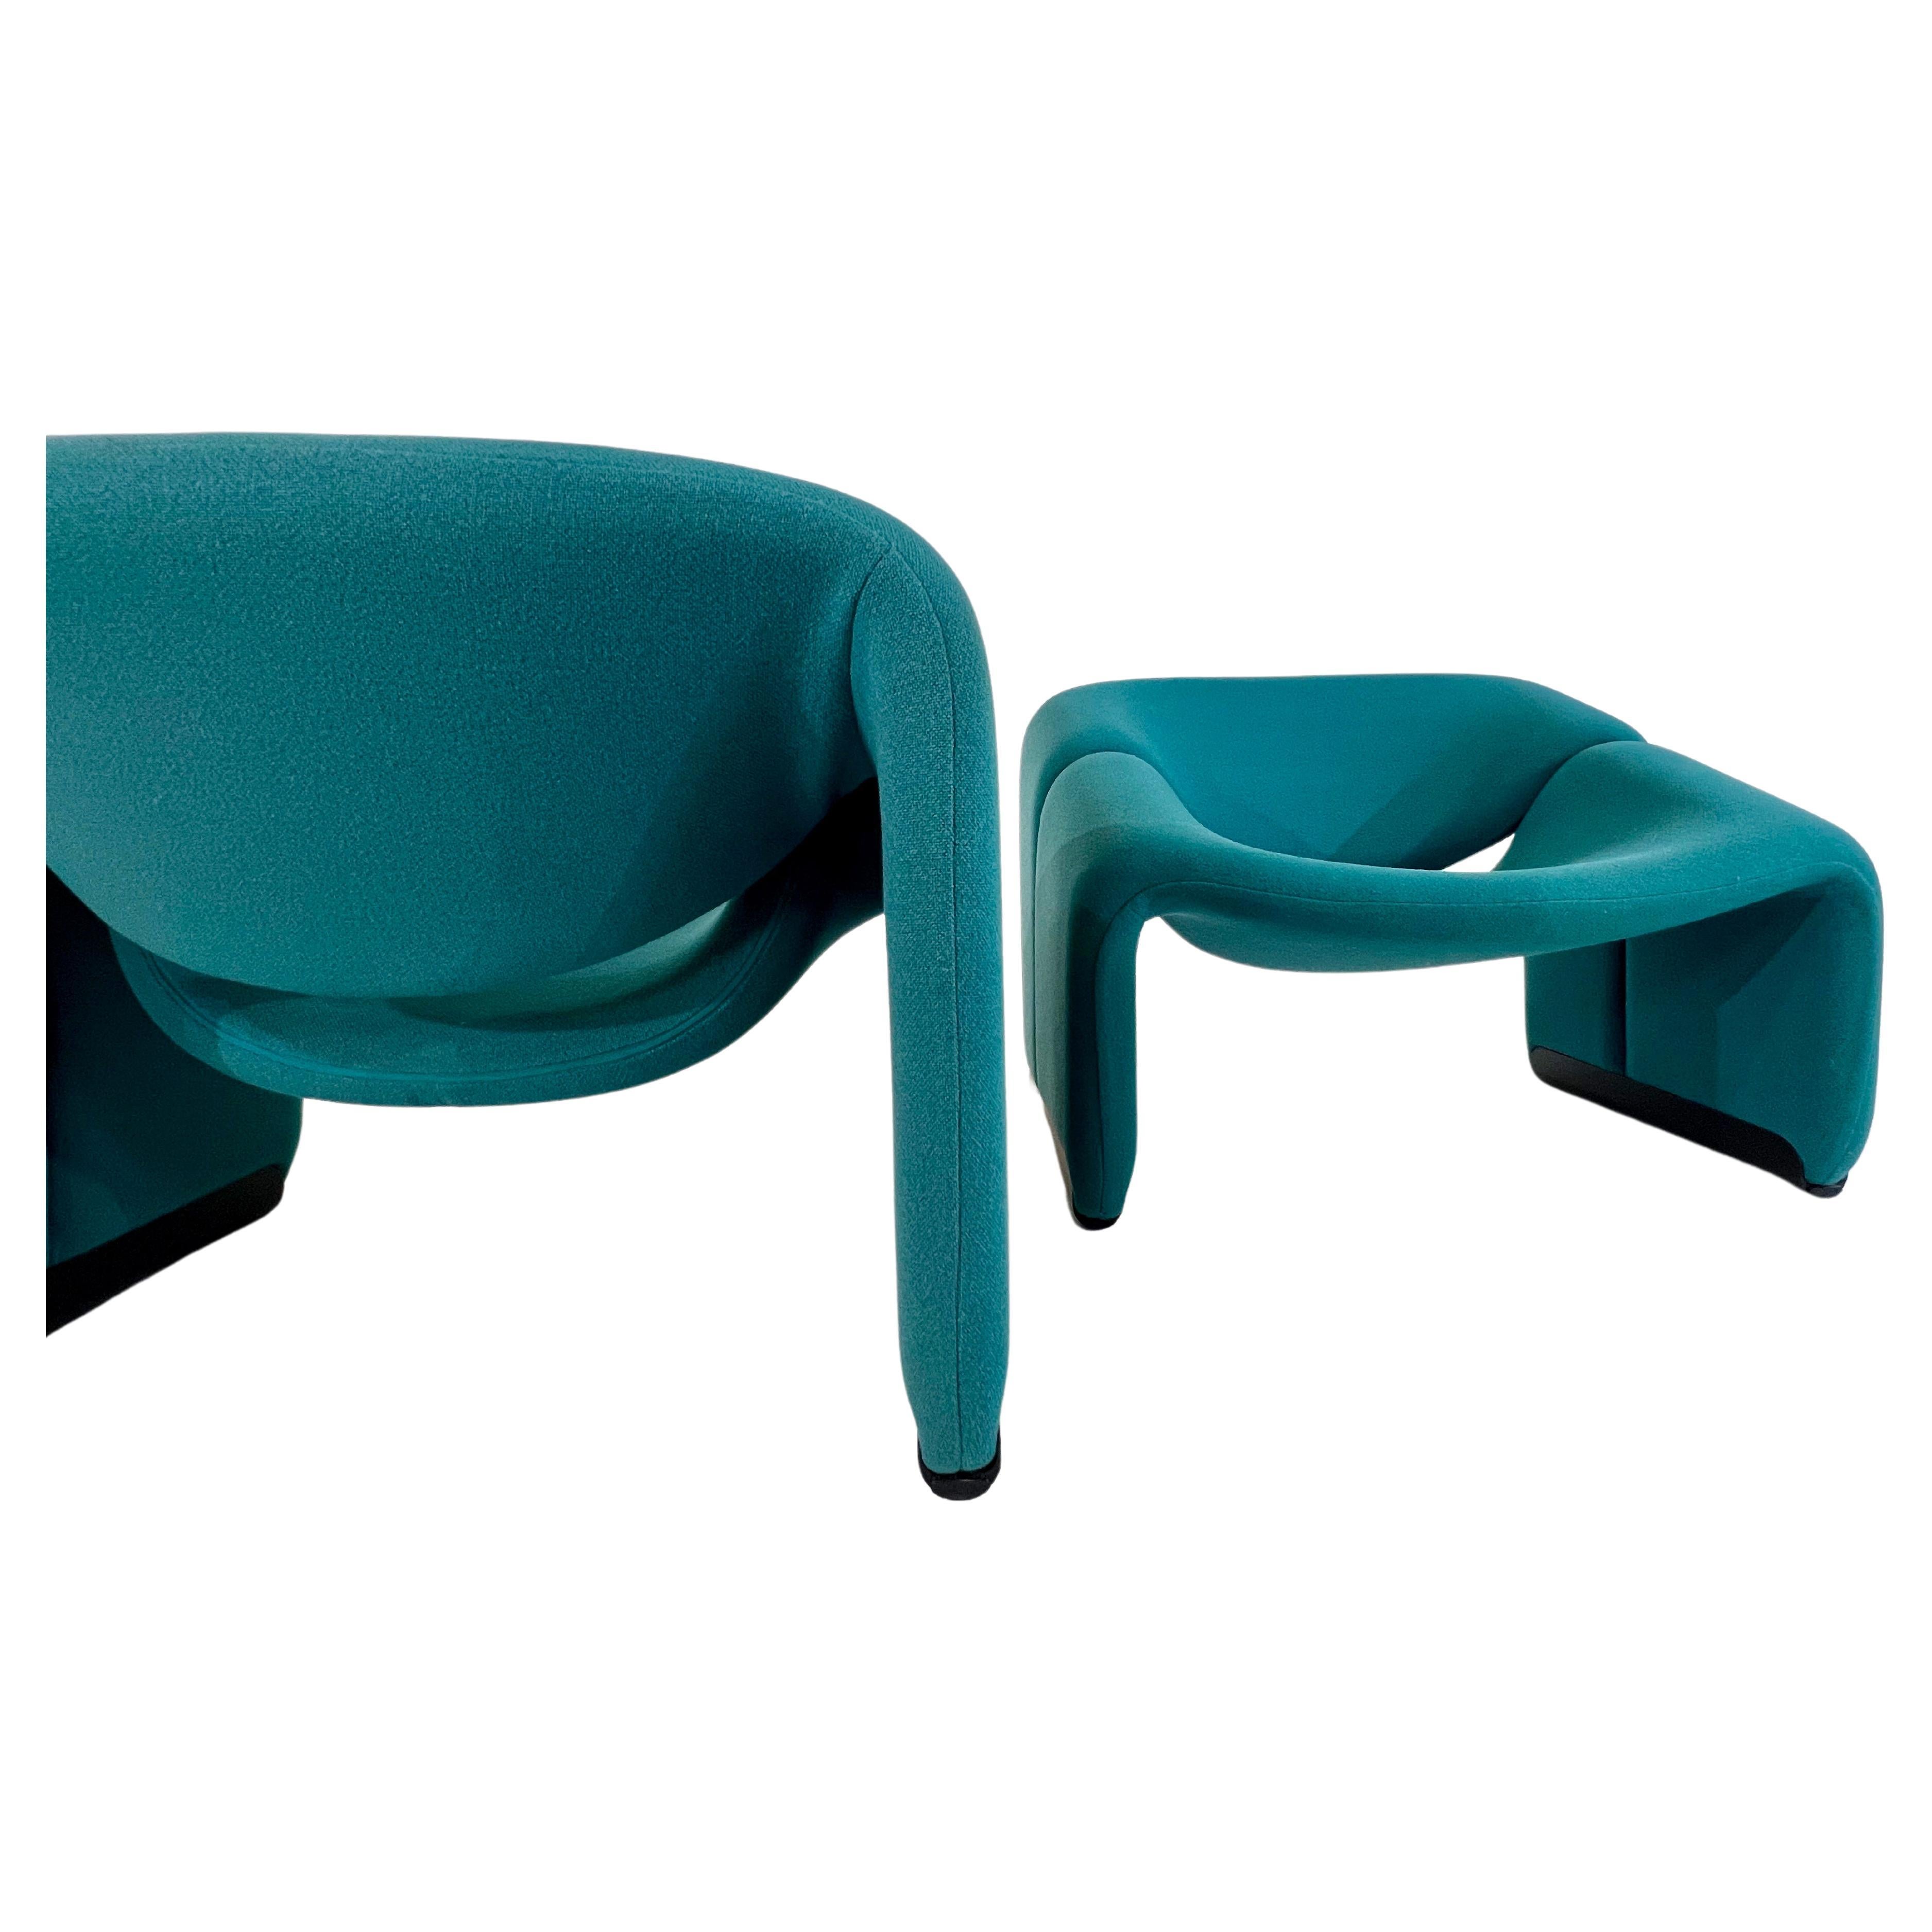 Pair of arm chairs F598 (Groovy) by Pierre Paulin for Artifort. ONE LEFT! For Sale